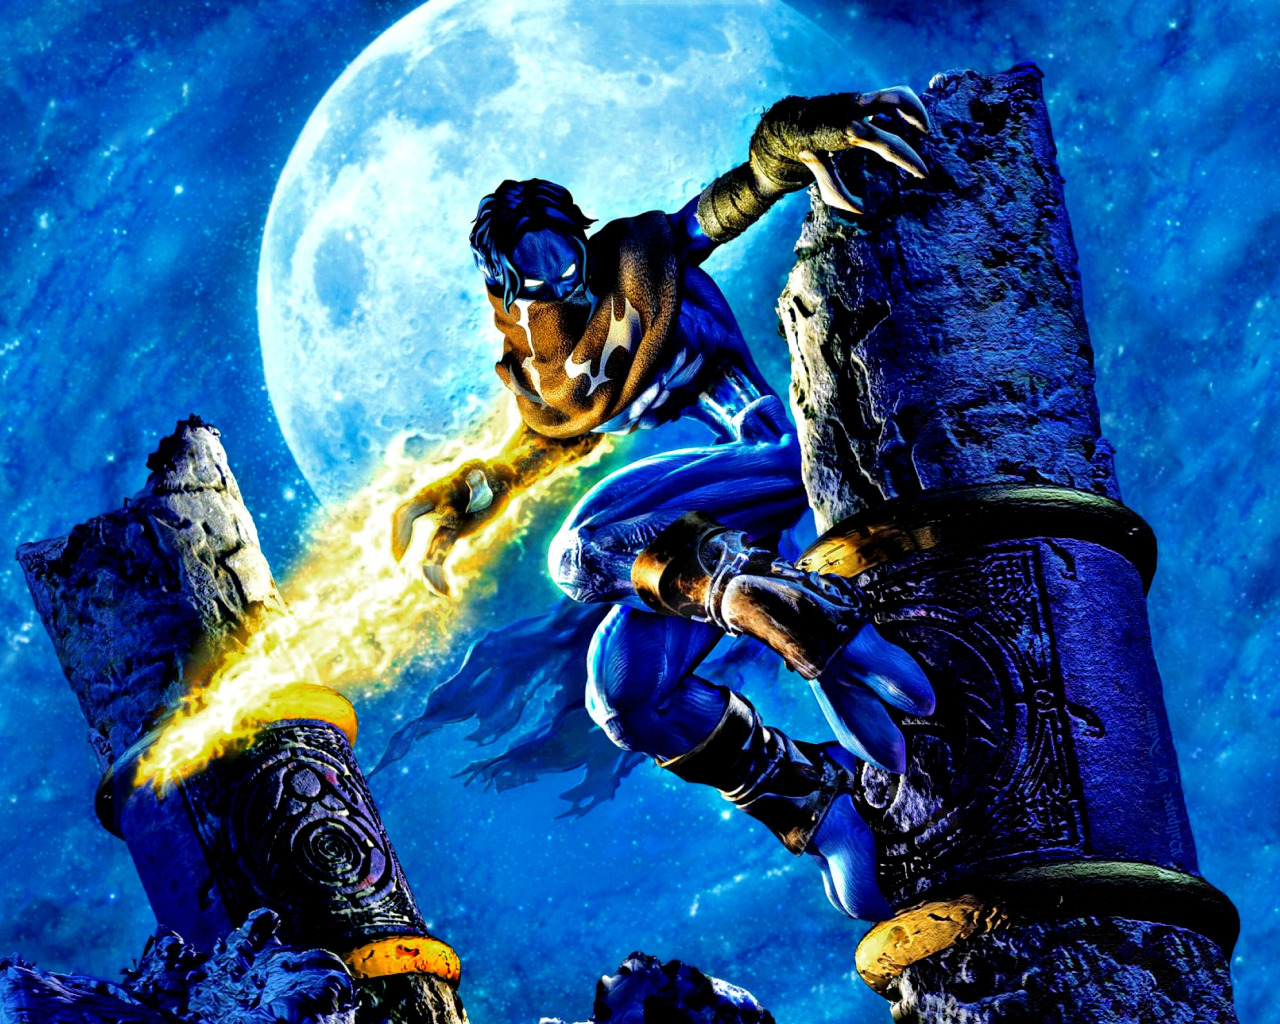 Legacy of kain on steam фото 80